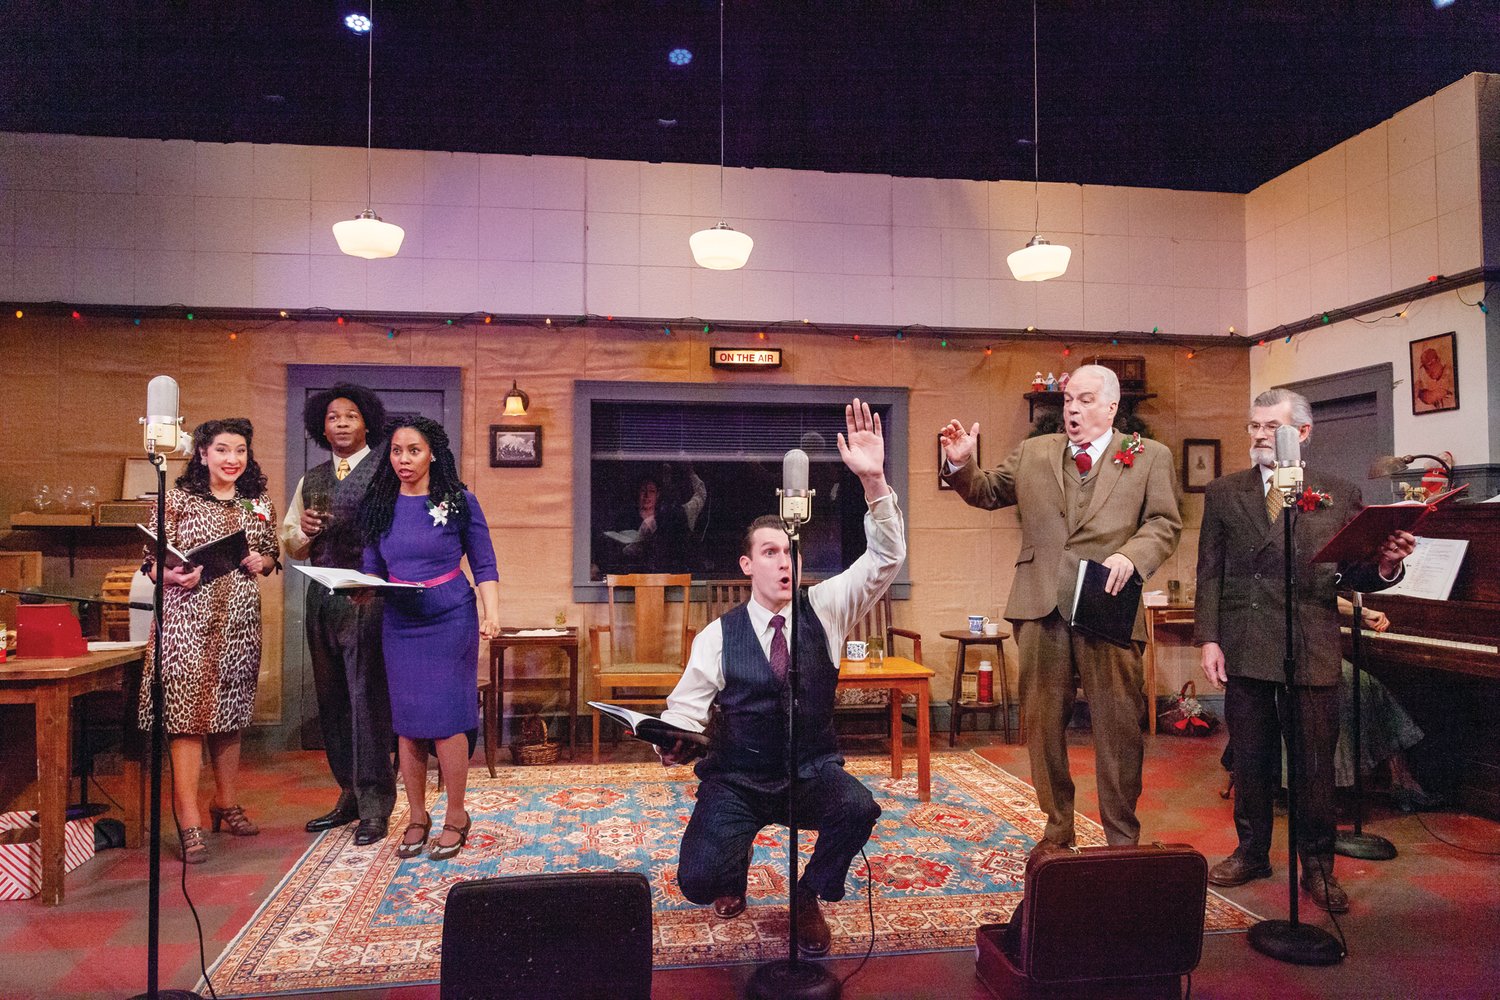 (L to R) Helena Tafuri as Violet Bick, Rodney Witherspoon II as Harry Bailey, Lynsey Ford as Mary Hatch, Jeff Church as George Bailey, Fred Sullivan, Jr. as Henry F. Potter, Richard Noble as Billy Bailey